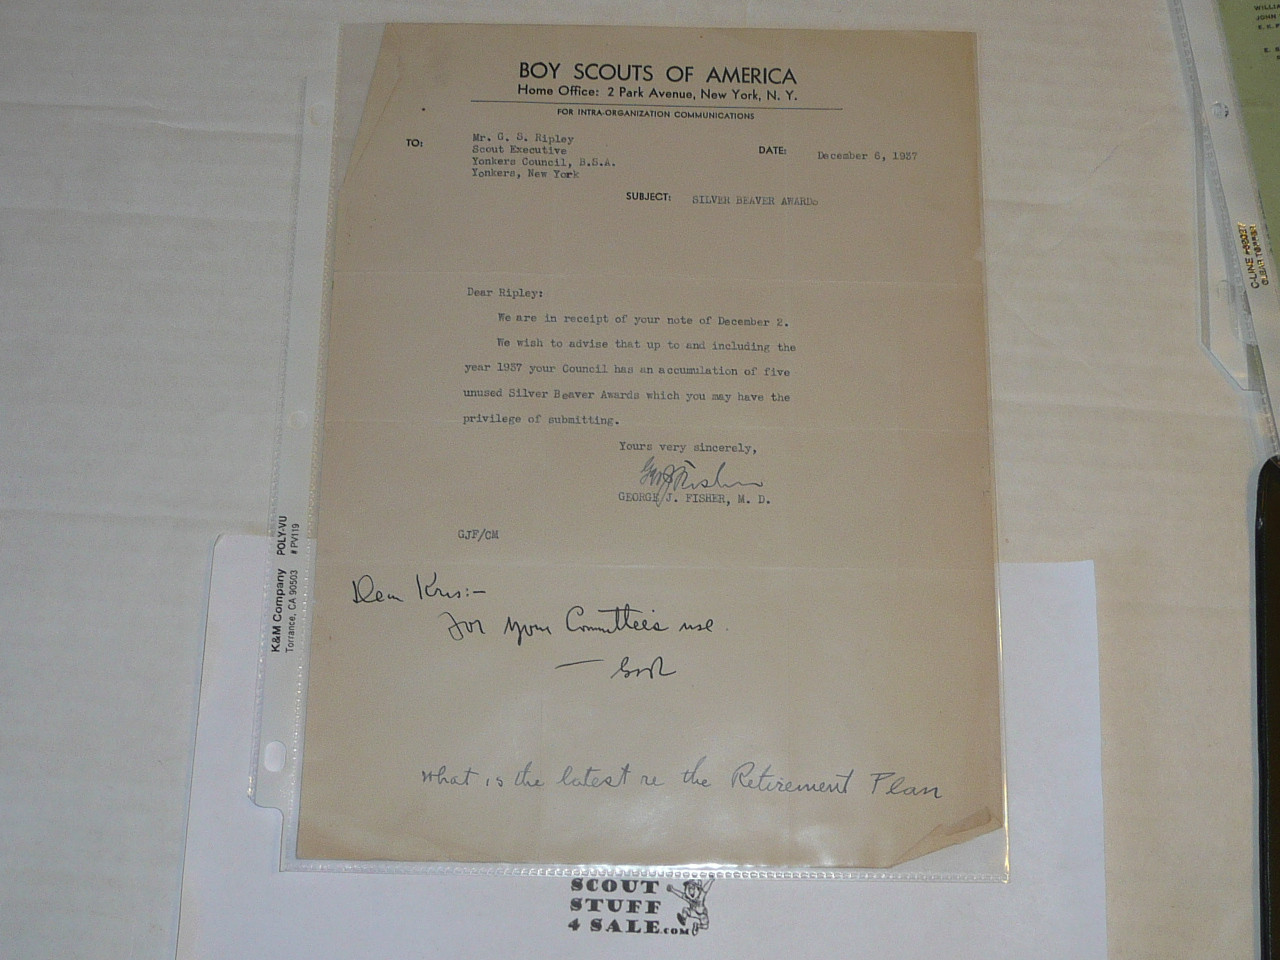 1937 Memo from George Fischer on Official Inter-office memo letterhead